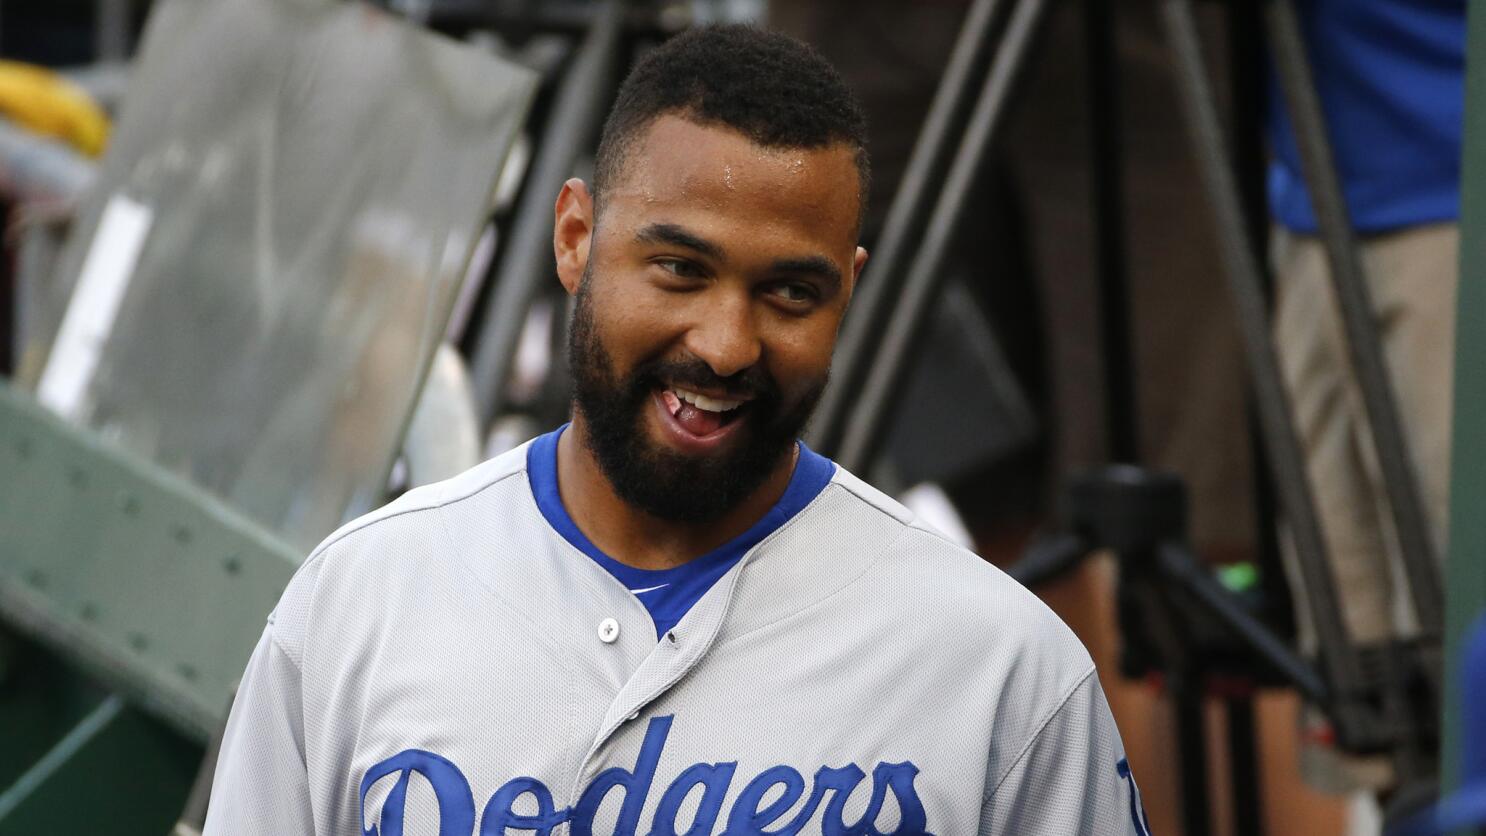 MLB notes: Reds release outfielder Matt Kemp - Los Angeles Times